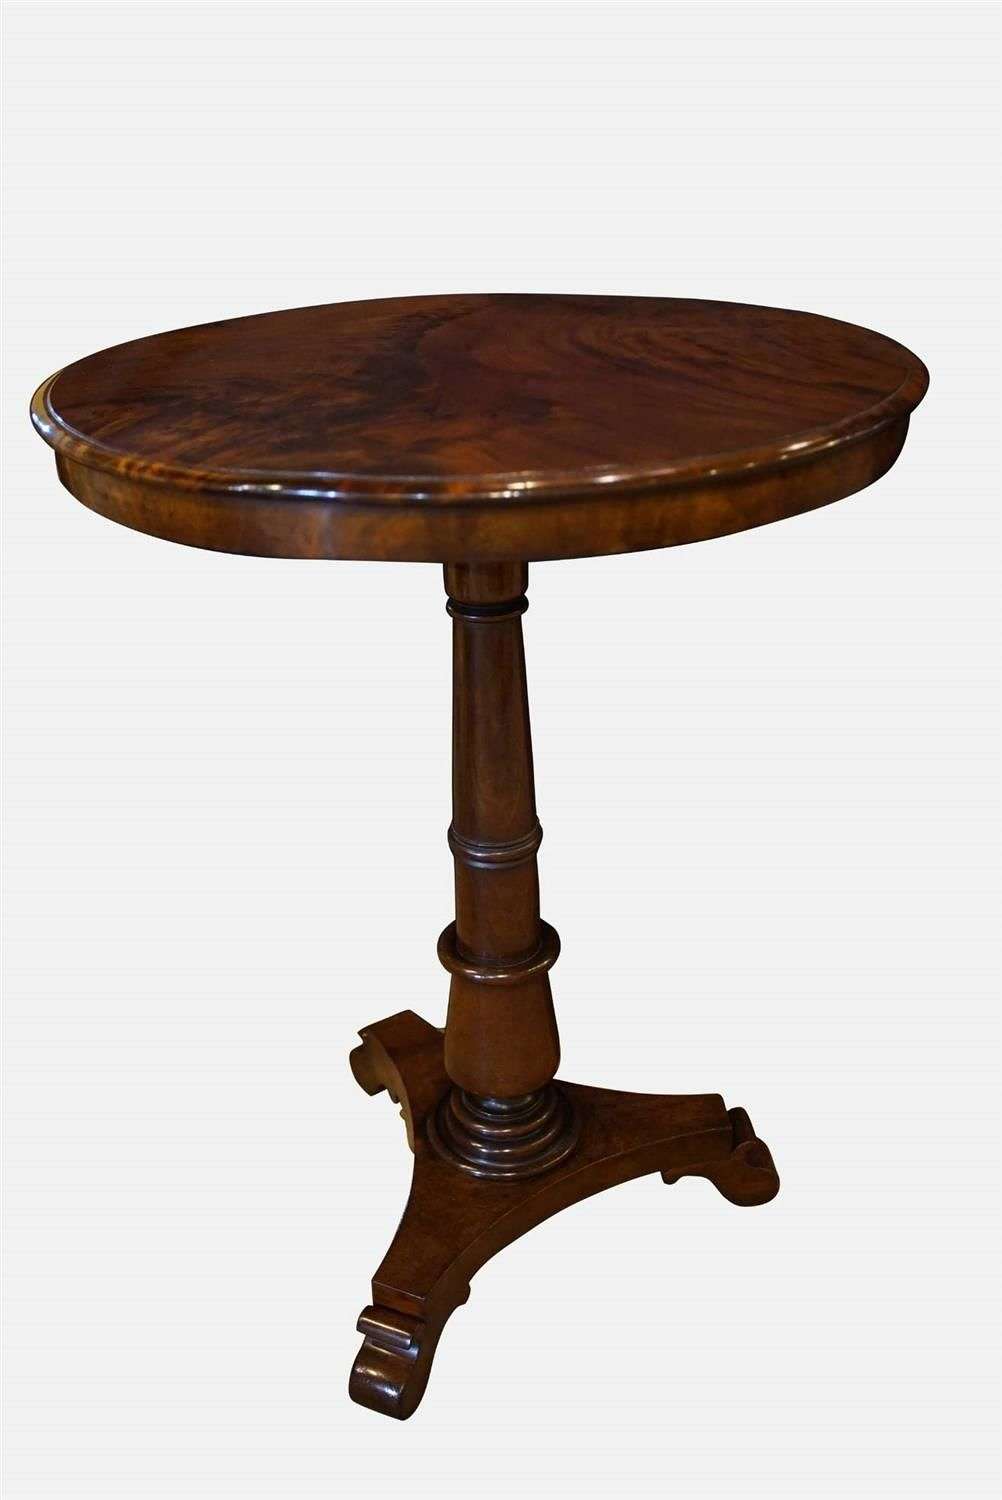 Mahogany Wine Table with Figured Top